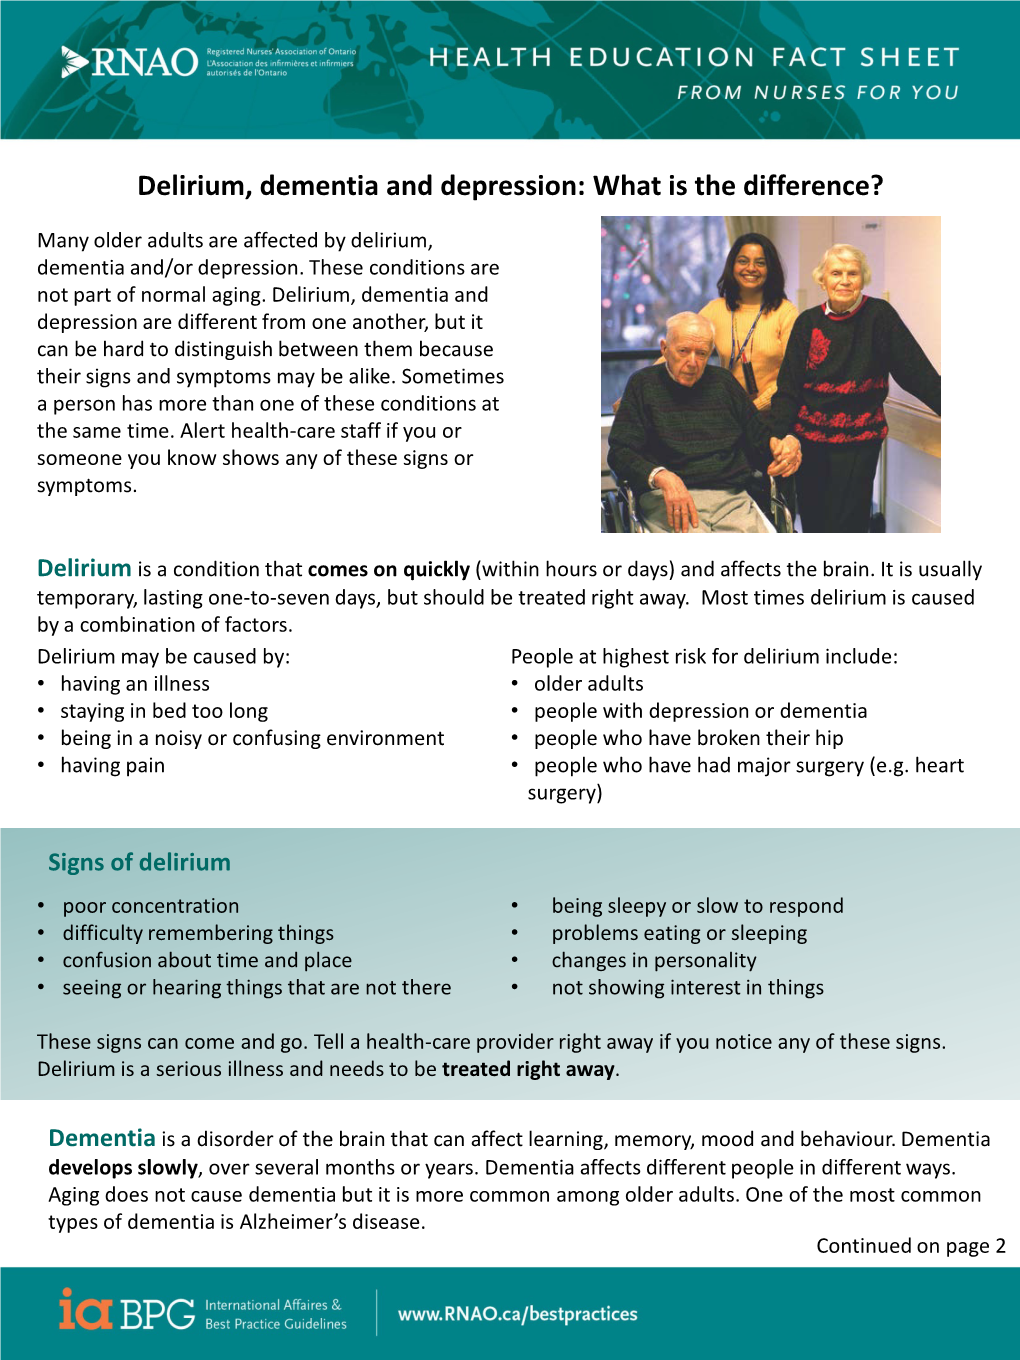 Delirium, Dementia and Depression: What Is the Difference?